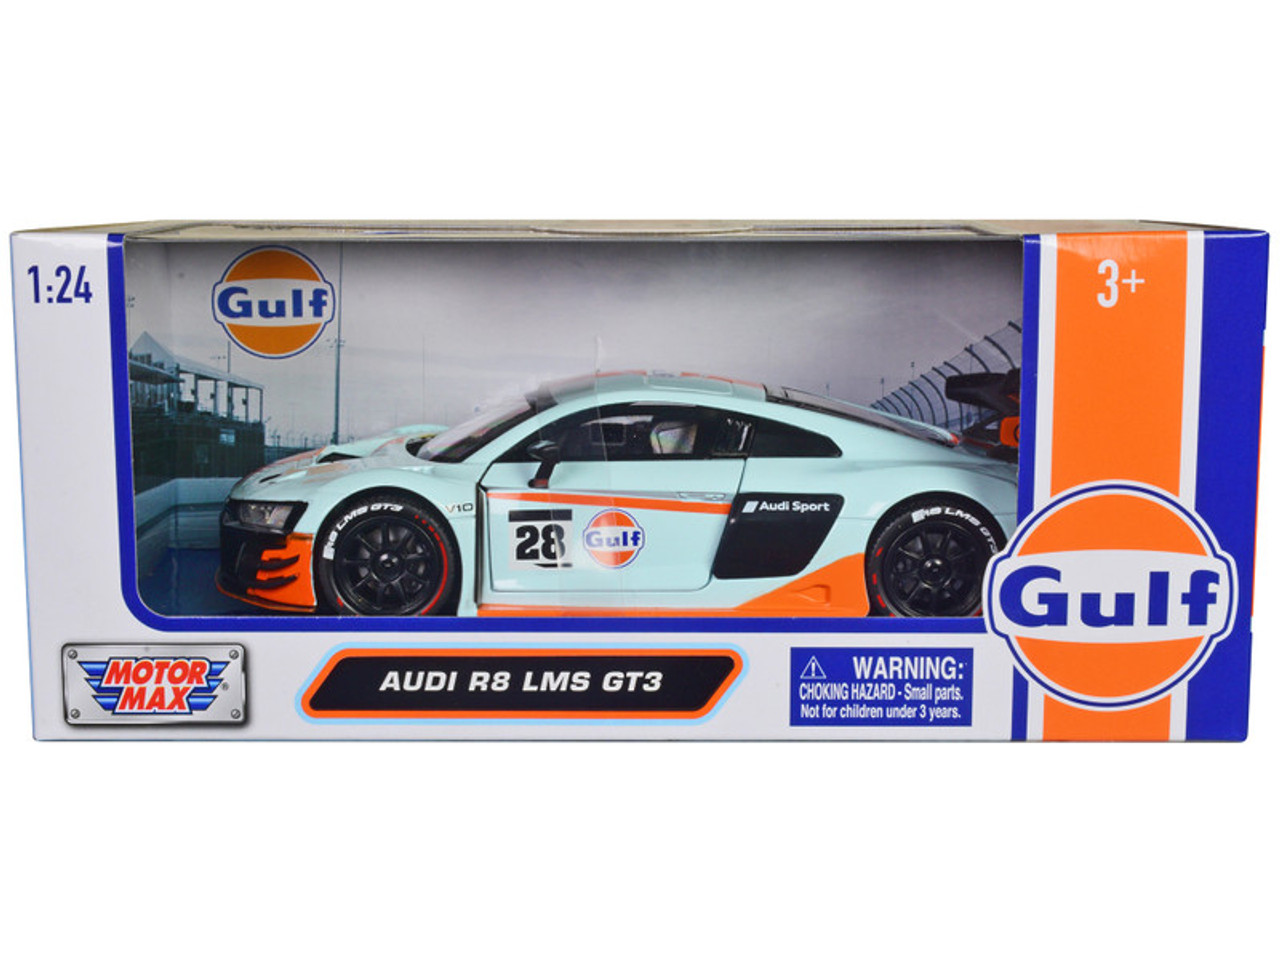 Audi R8 LMS GT3 #28 Light Blue with Orange Stripes Gulf Oil Gulf  Die-Cast Collection 1/24 Diecast Model Car by Motormax 